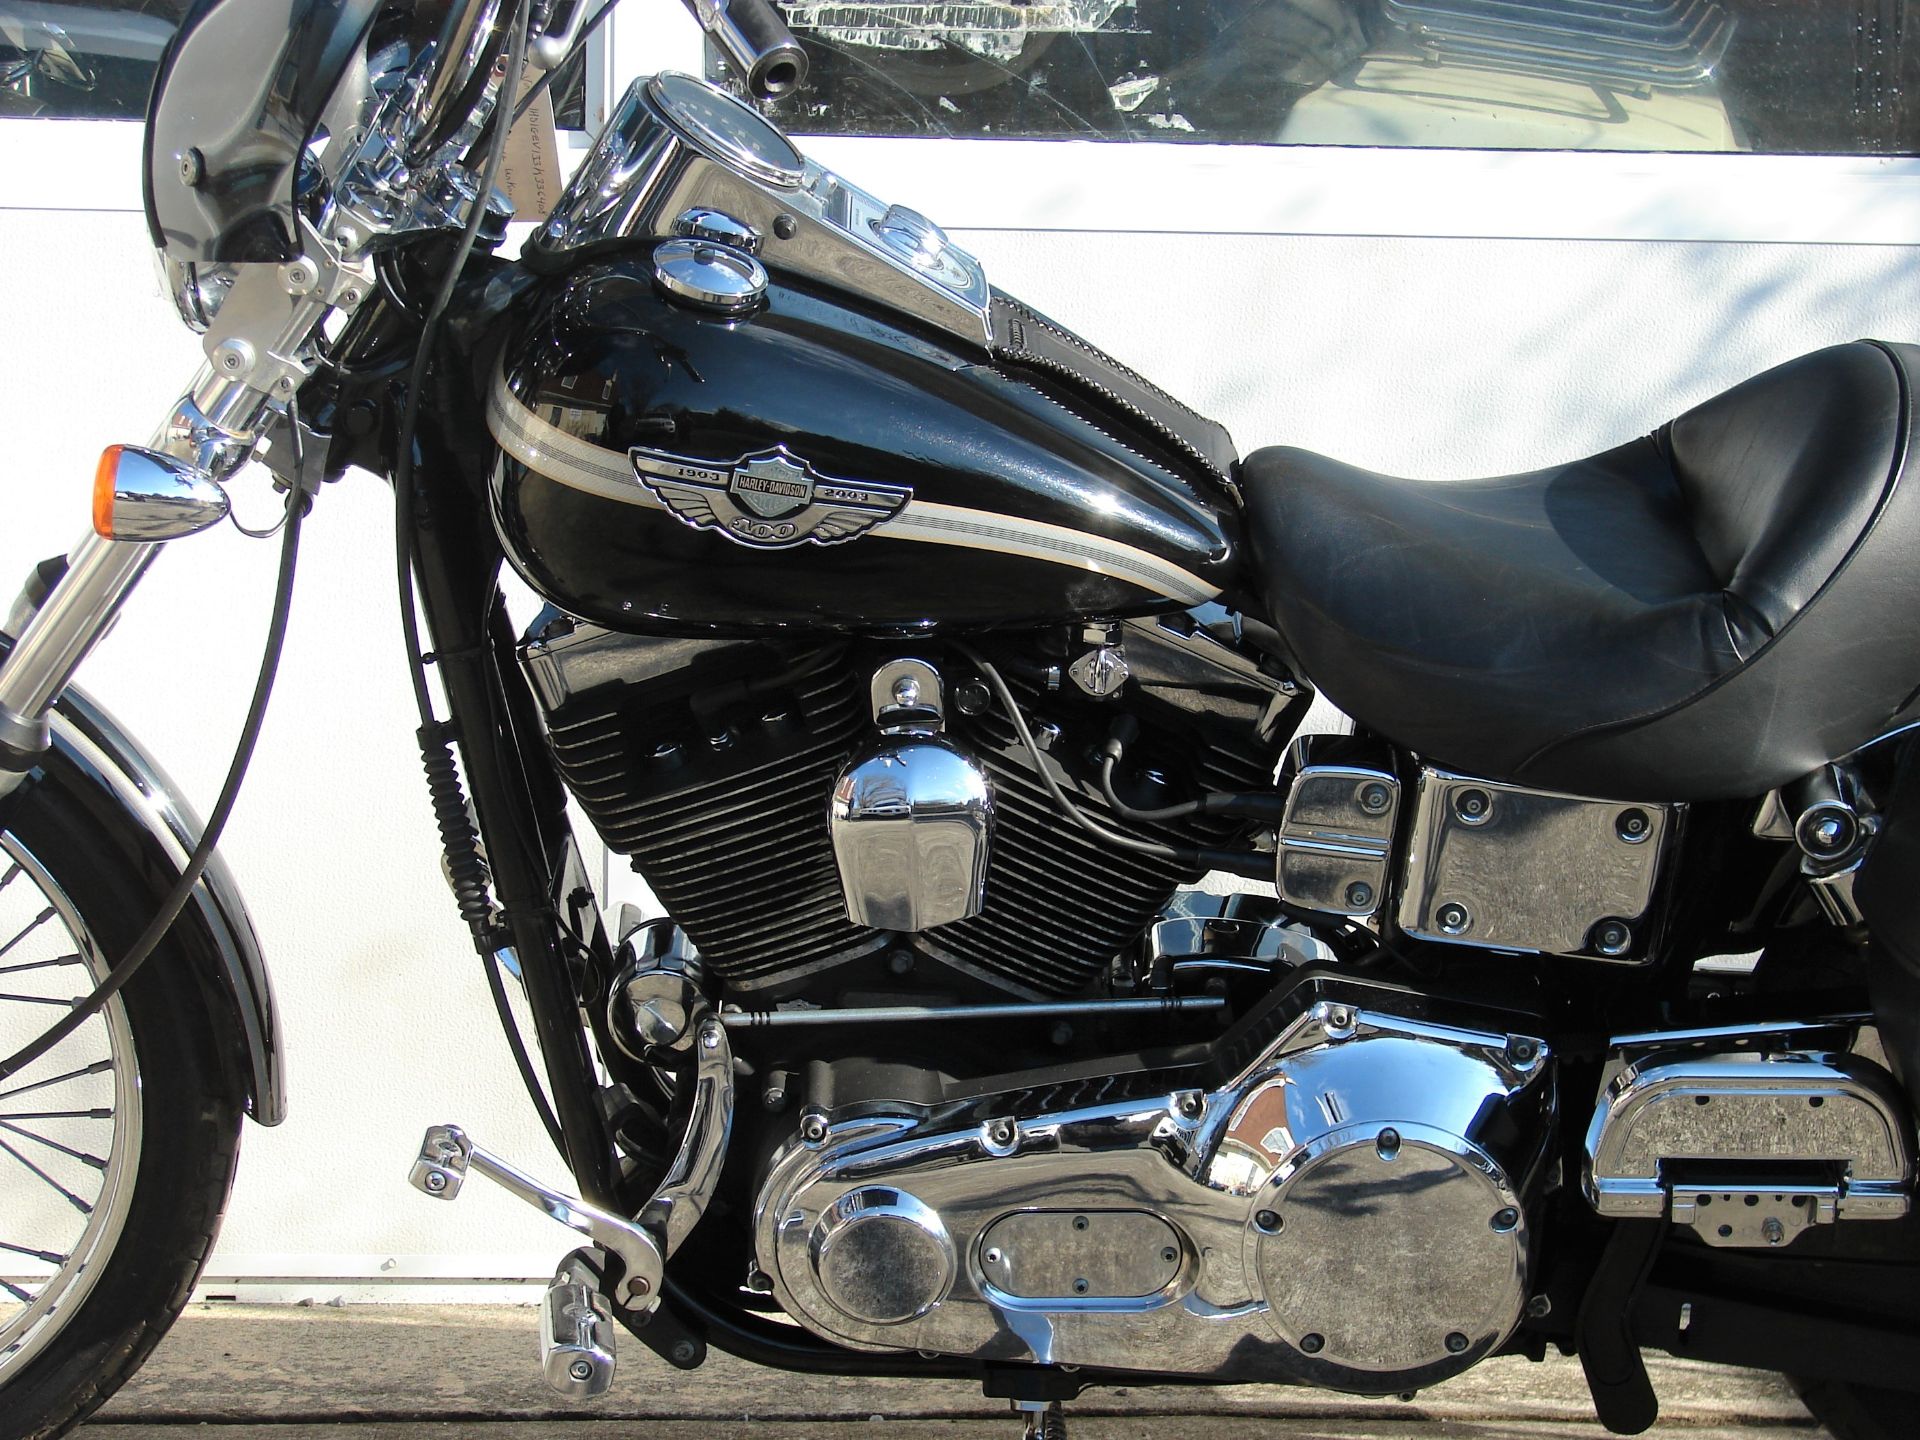 2003 Harley-Davidson FXDWG Dyna Wide Glide in Williamstown, New Jersey - Photo 6